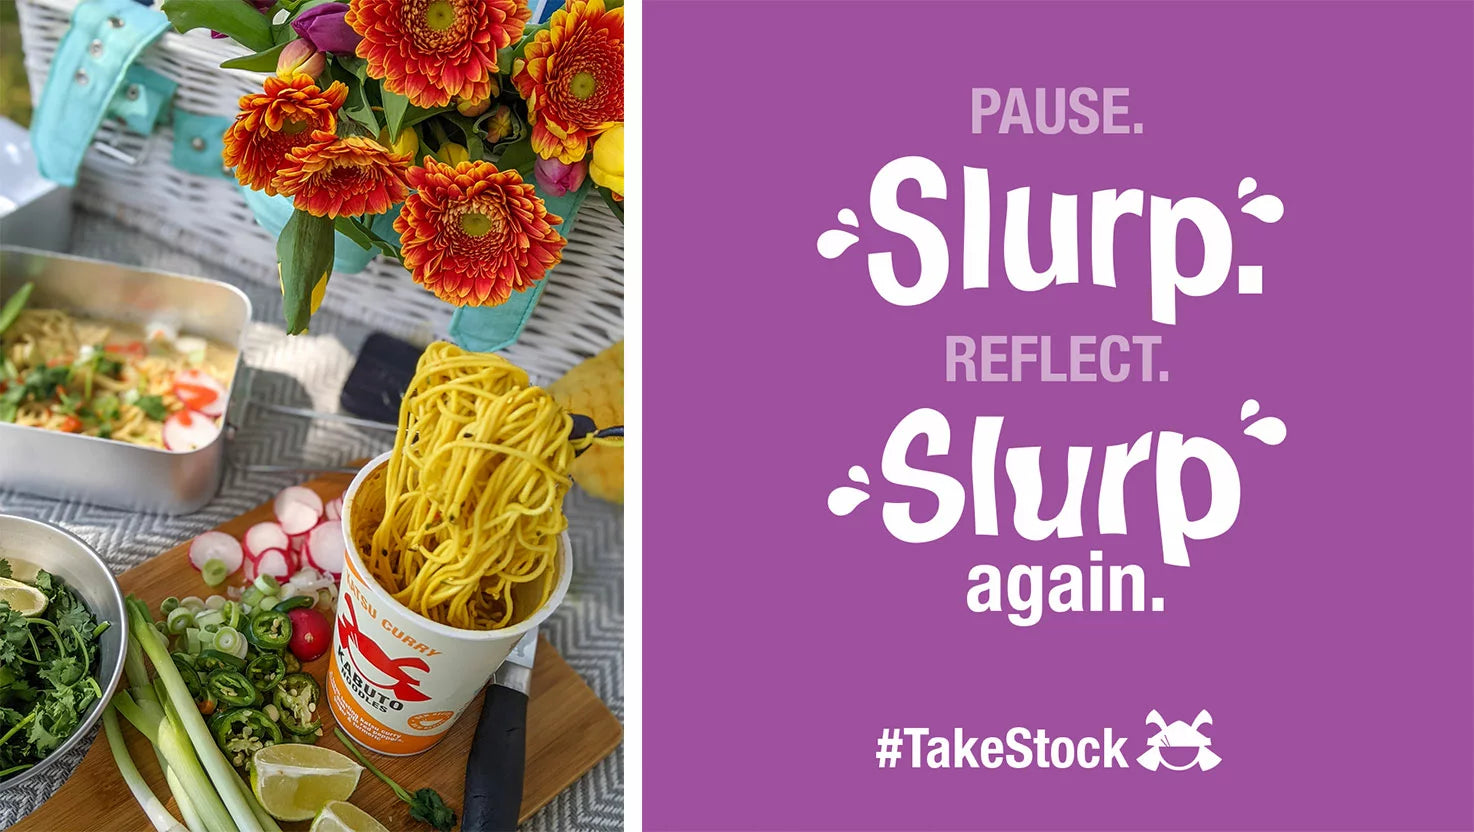 Time to sit back, relax and #Take Stock